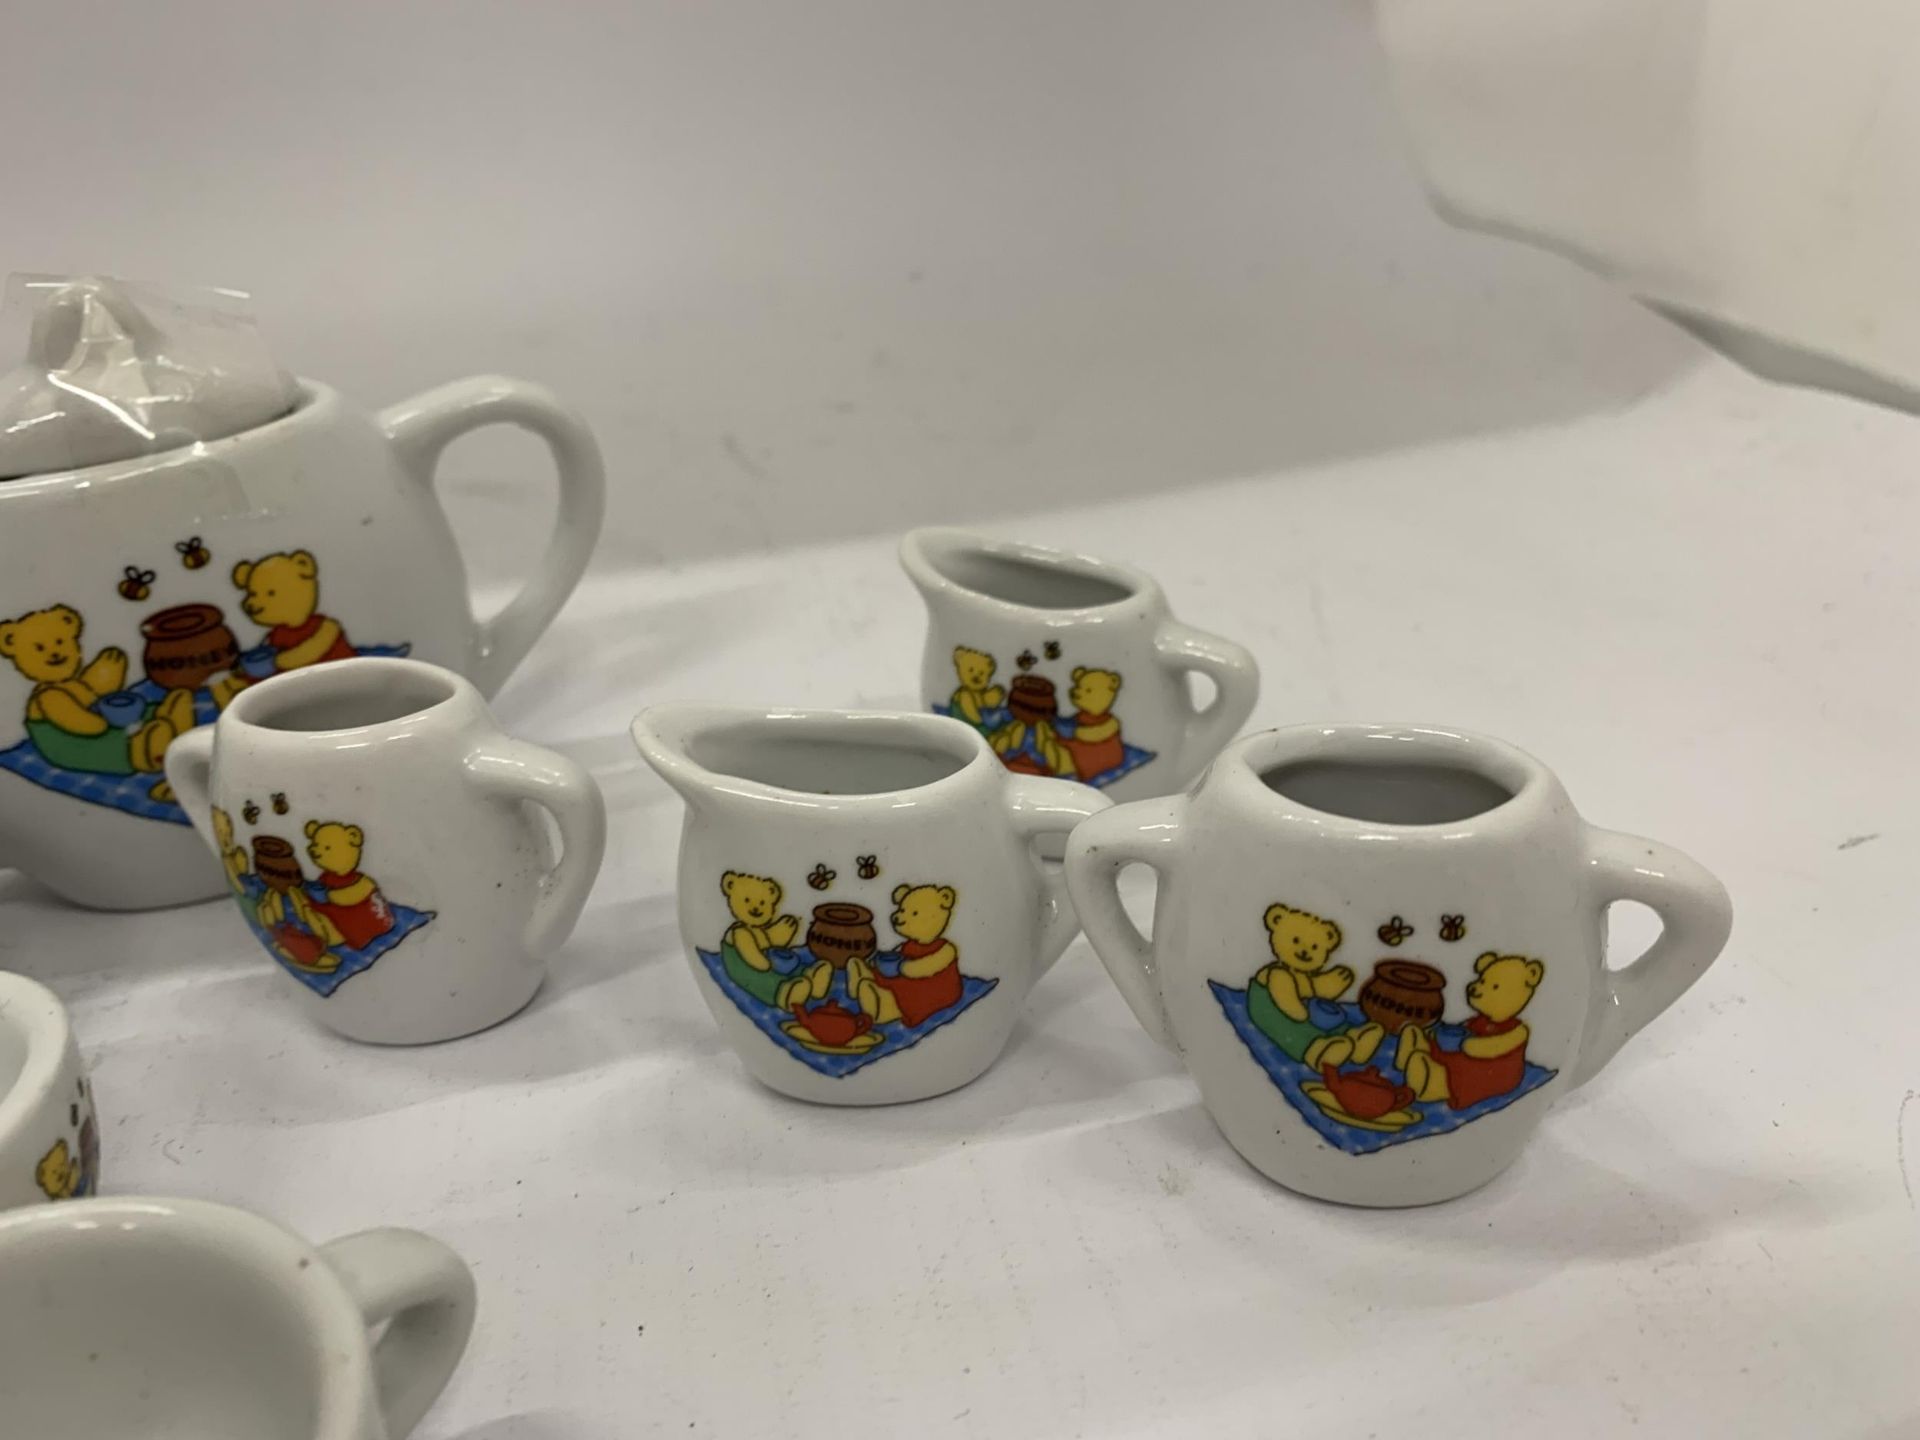 A MINIATURE CHILD'S POTTERY TEASET TO INCLUDE TEAPOT, JUGS, CUPS, ETC WITH A TEDDY BEARS PICNIC - Image 7 of 10